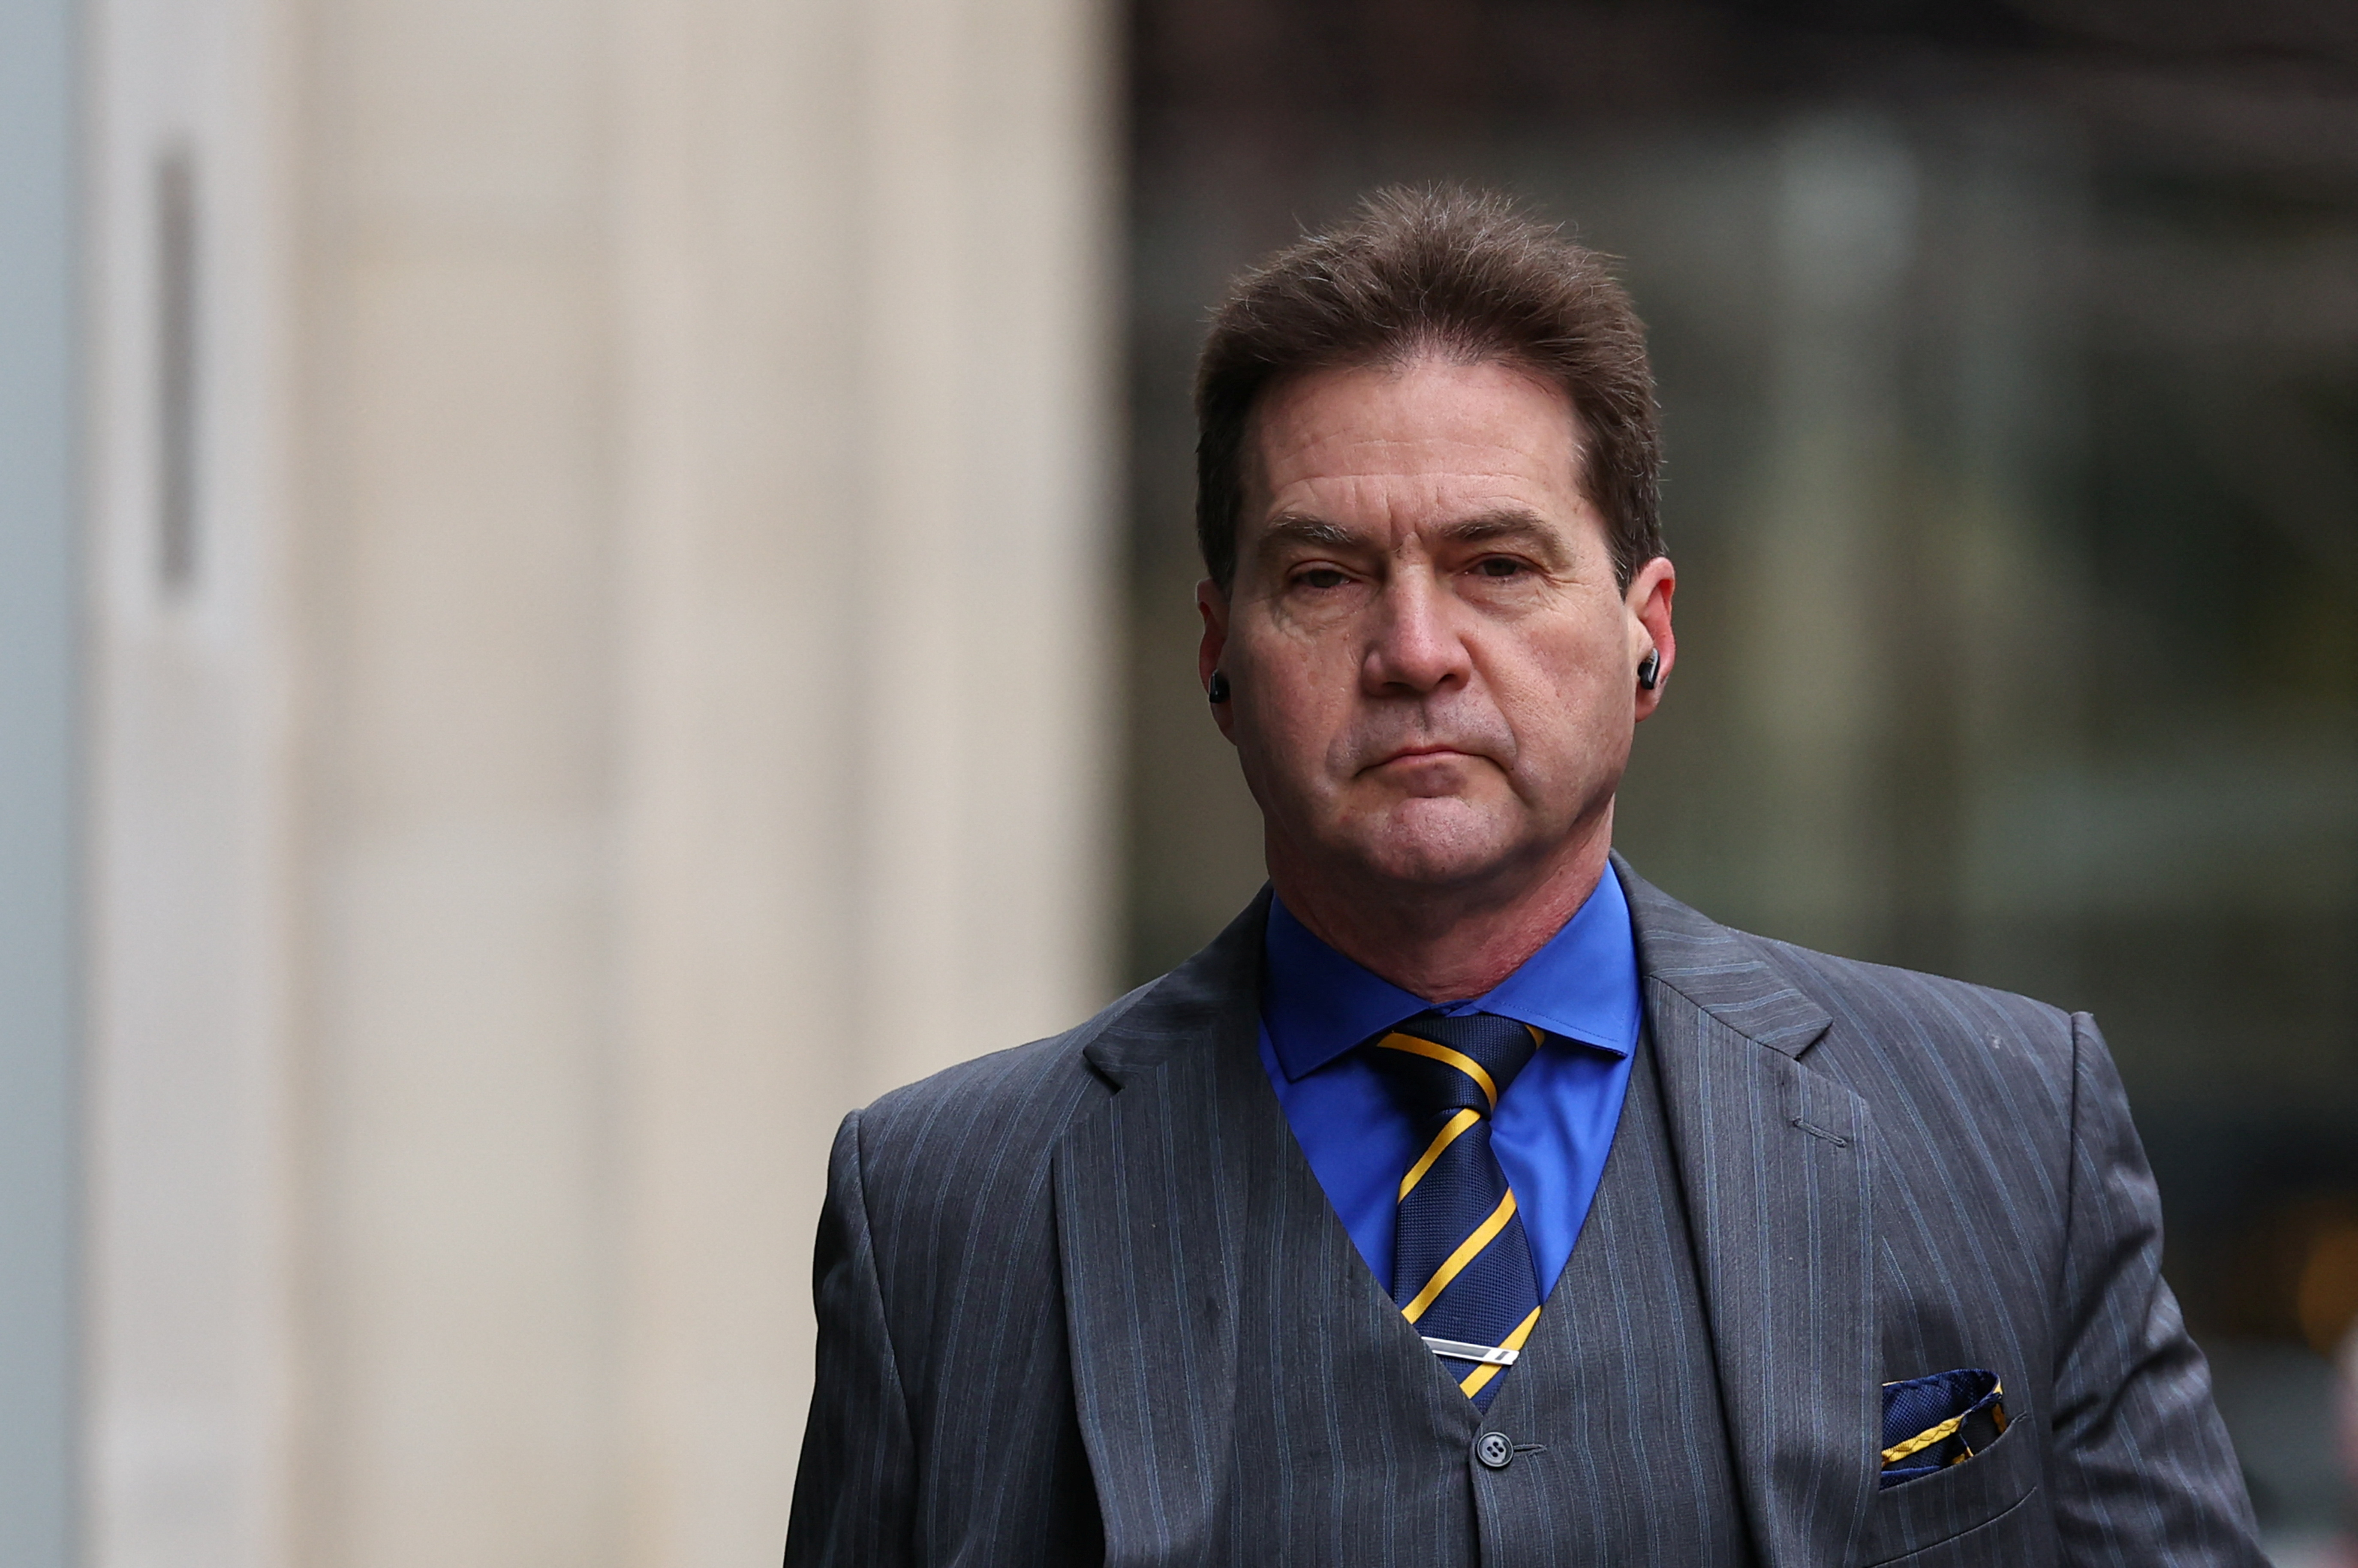 Australian computer scientist Craig Wright arrives at the Rolls Building of the High Court in London